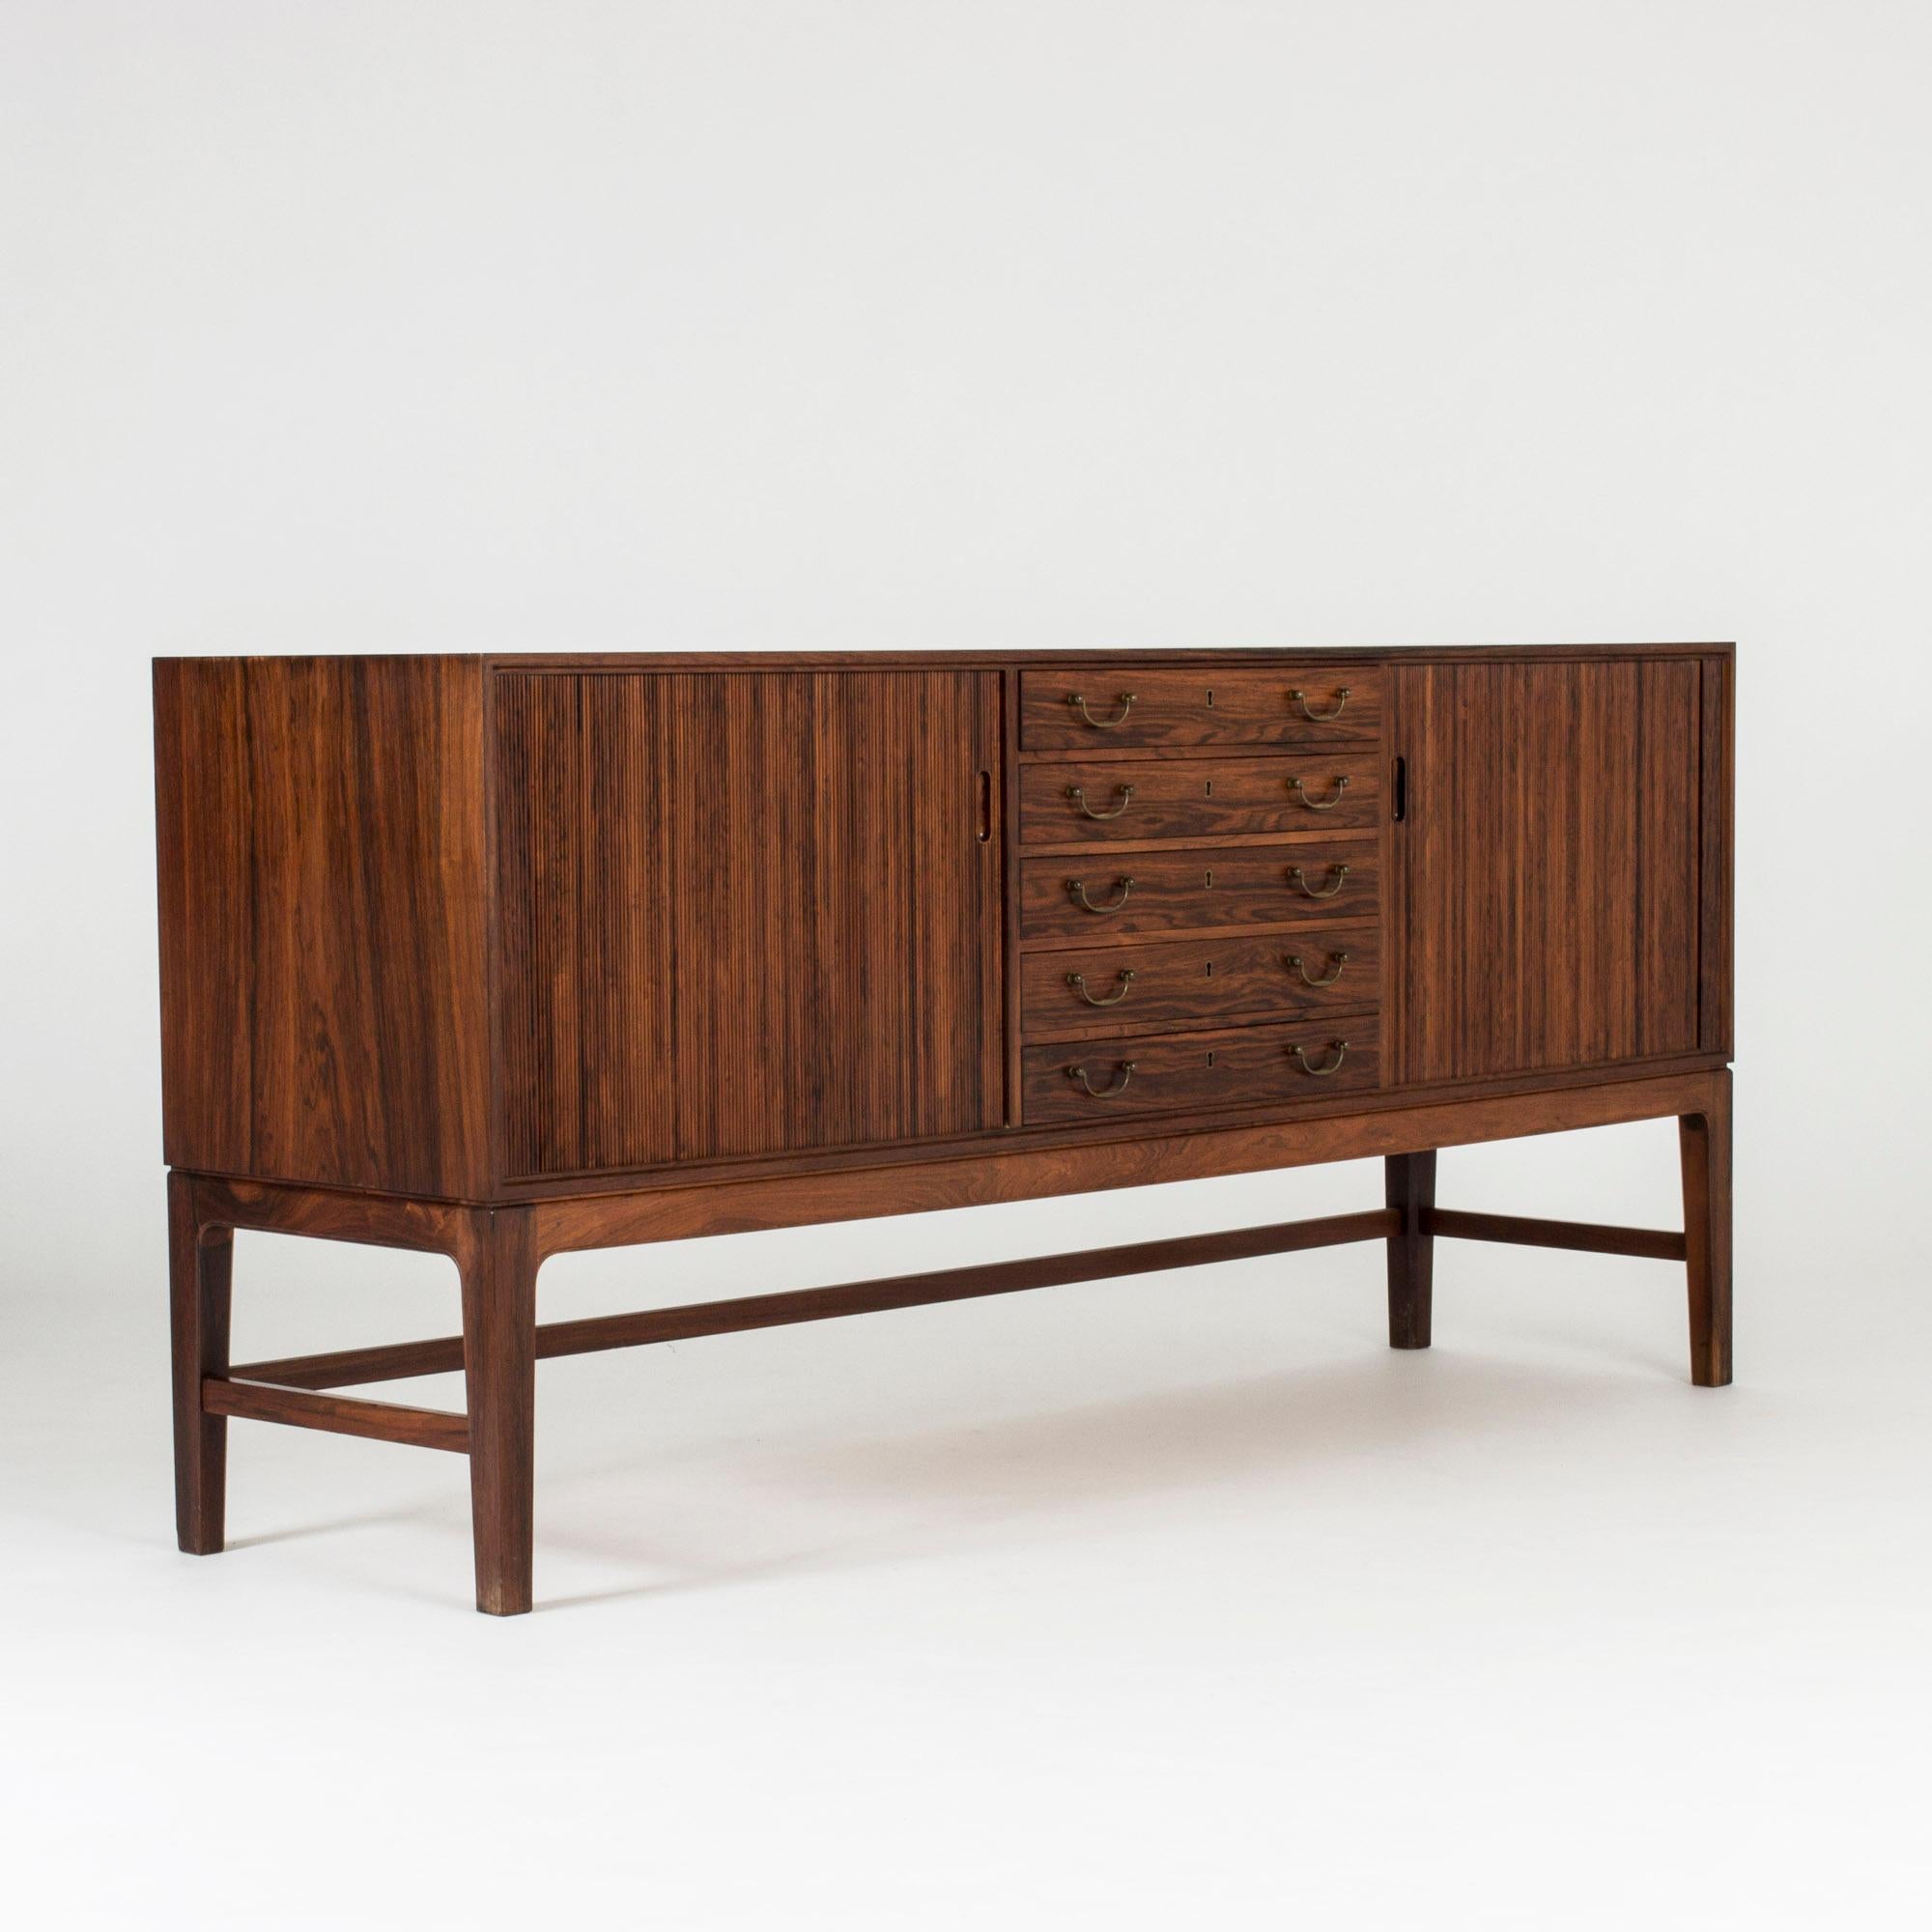 Elegant rosewood sideboard by Ole Wanscher, with a centred drawers with brass handles and jalousie doors on either side hiding shelves inside. Nice contrasting direction of the lines of the drawers and the jalousies lines.